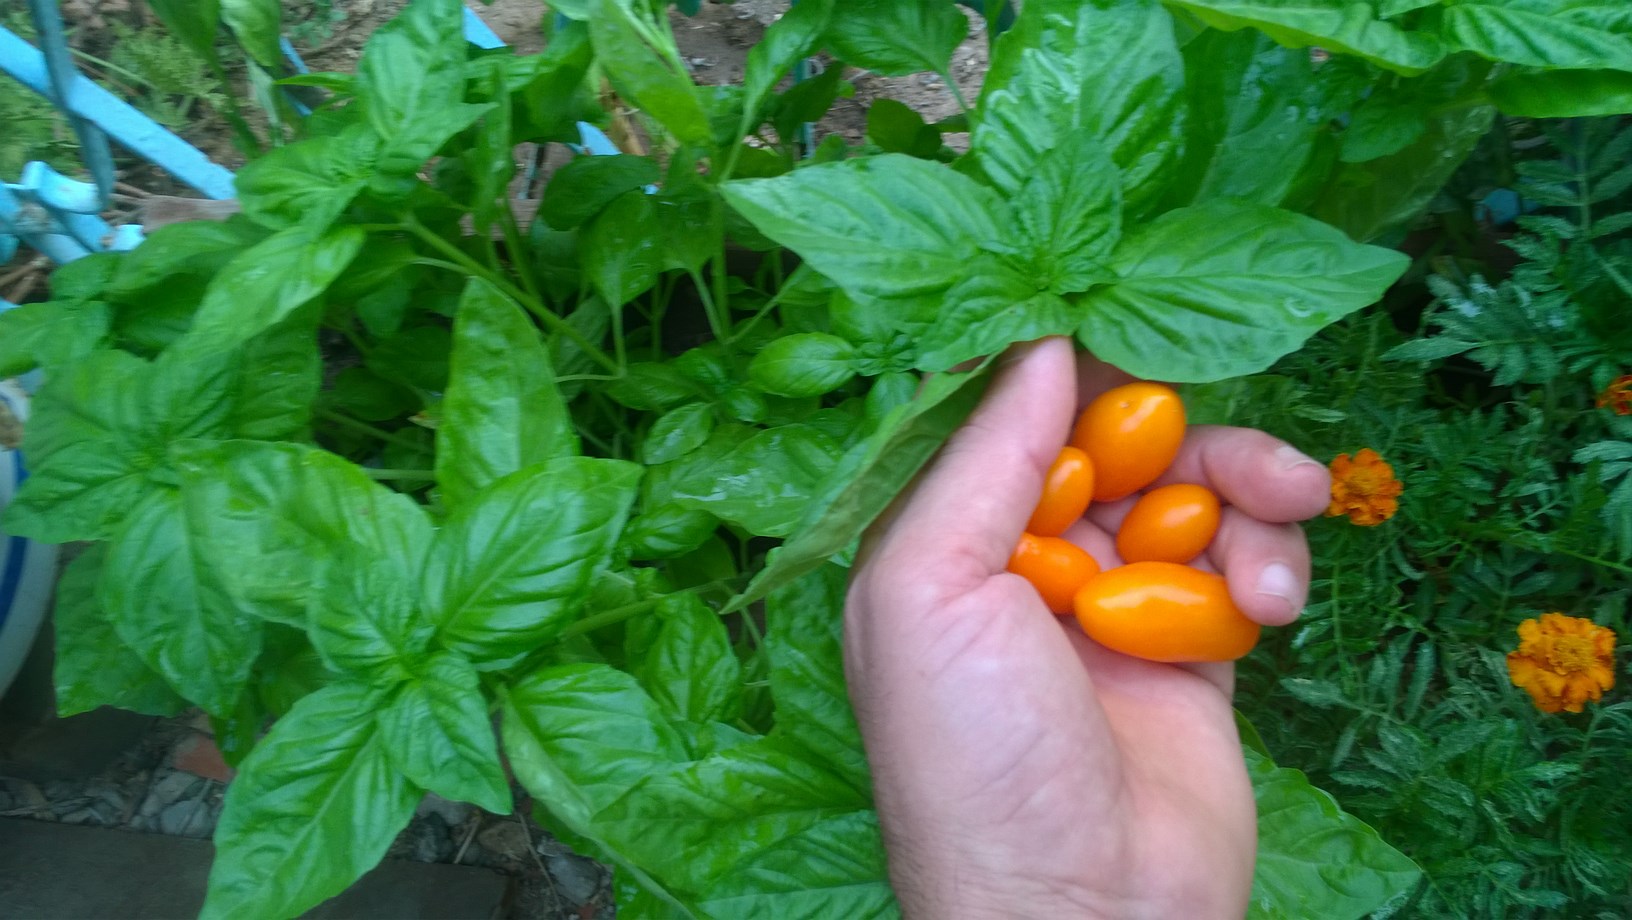 Growing tomatoes and basil near each other can make each crop taste better.